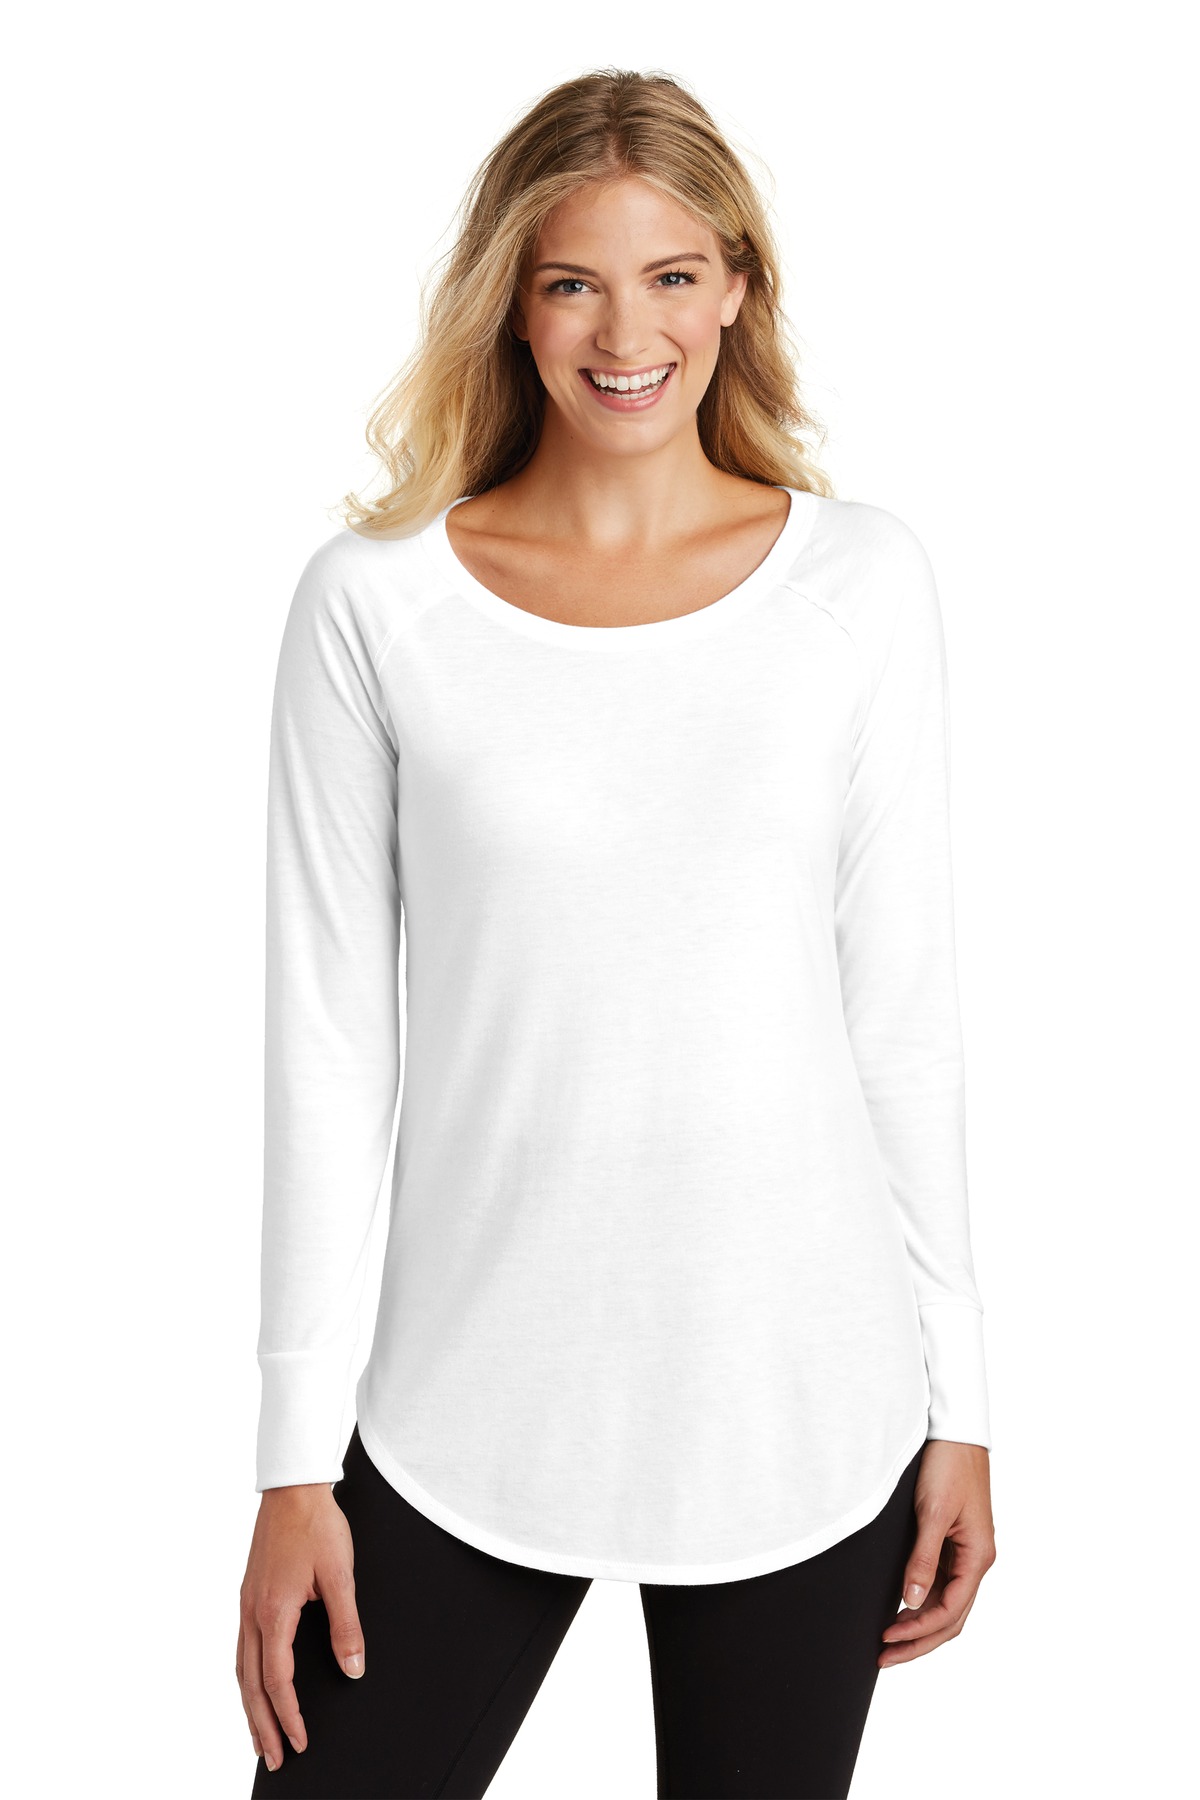 District Ladies Hospitality T-Shirts ® Womens Perfect Tri ® Long Sleeve Tunic Tee.-District